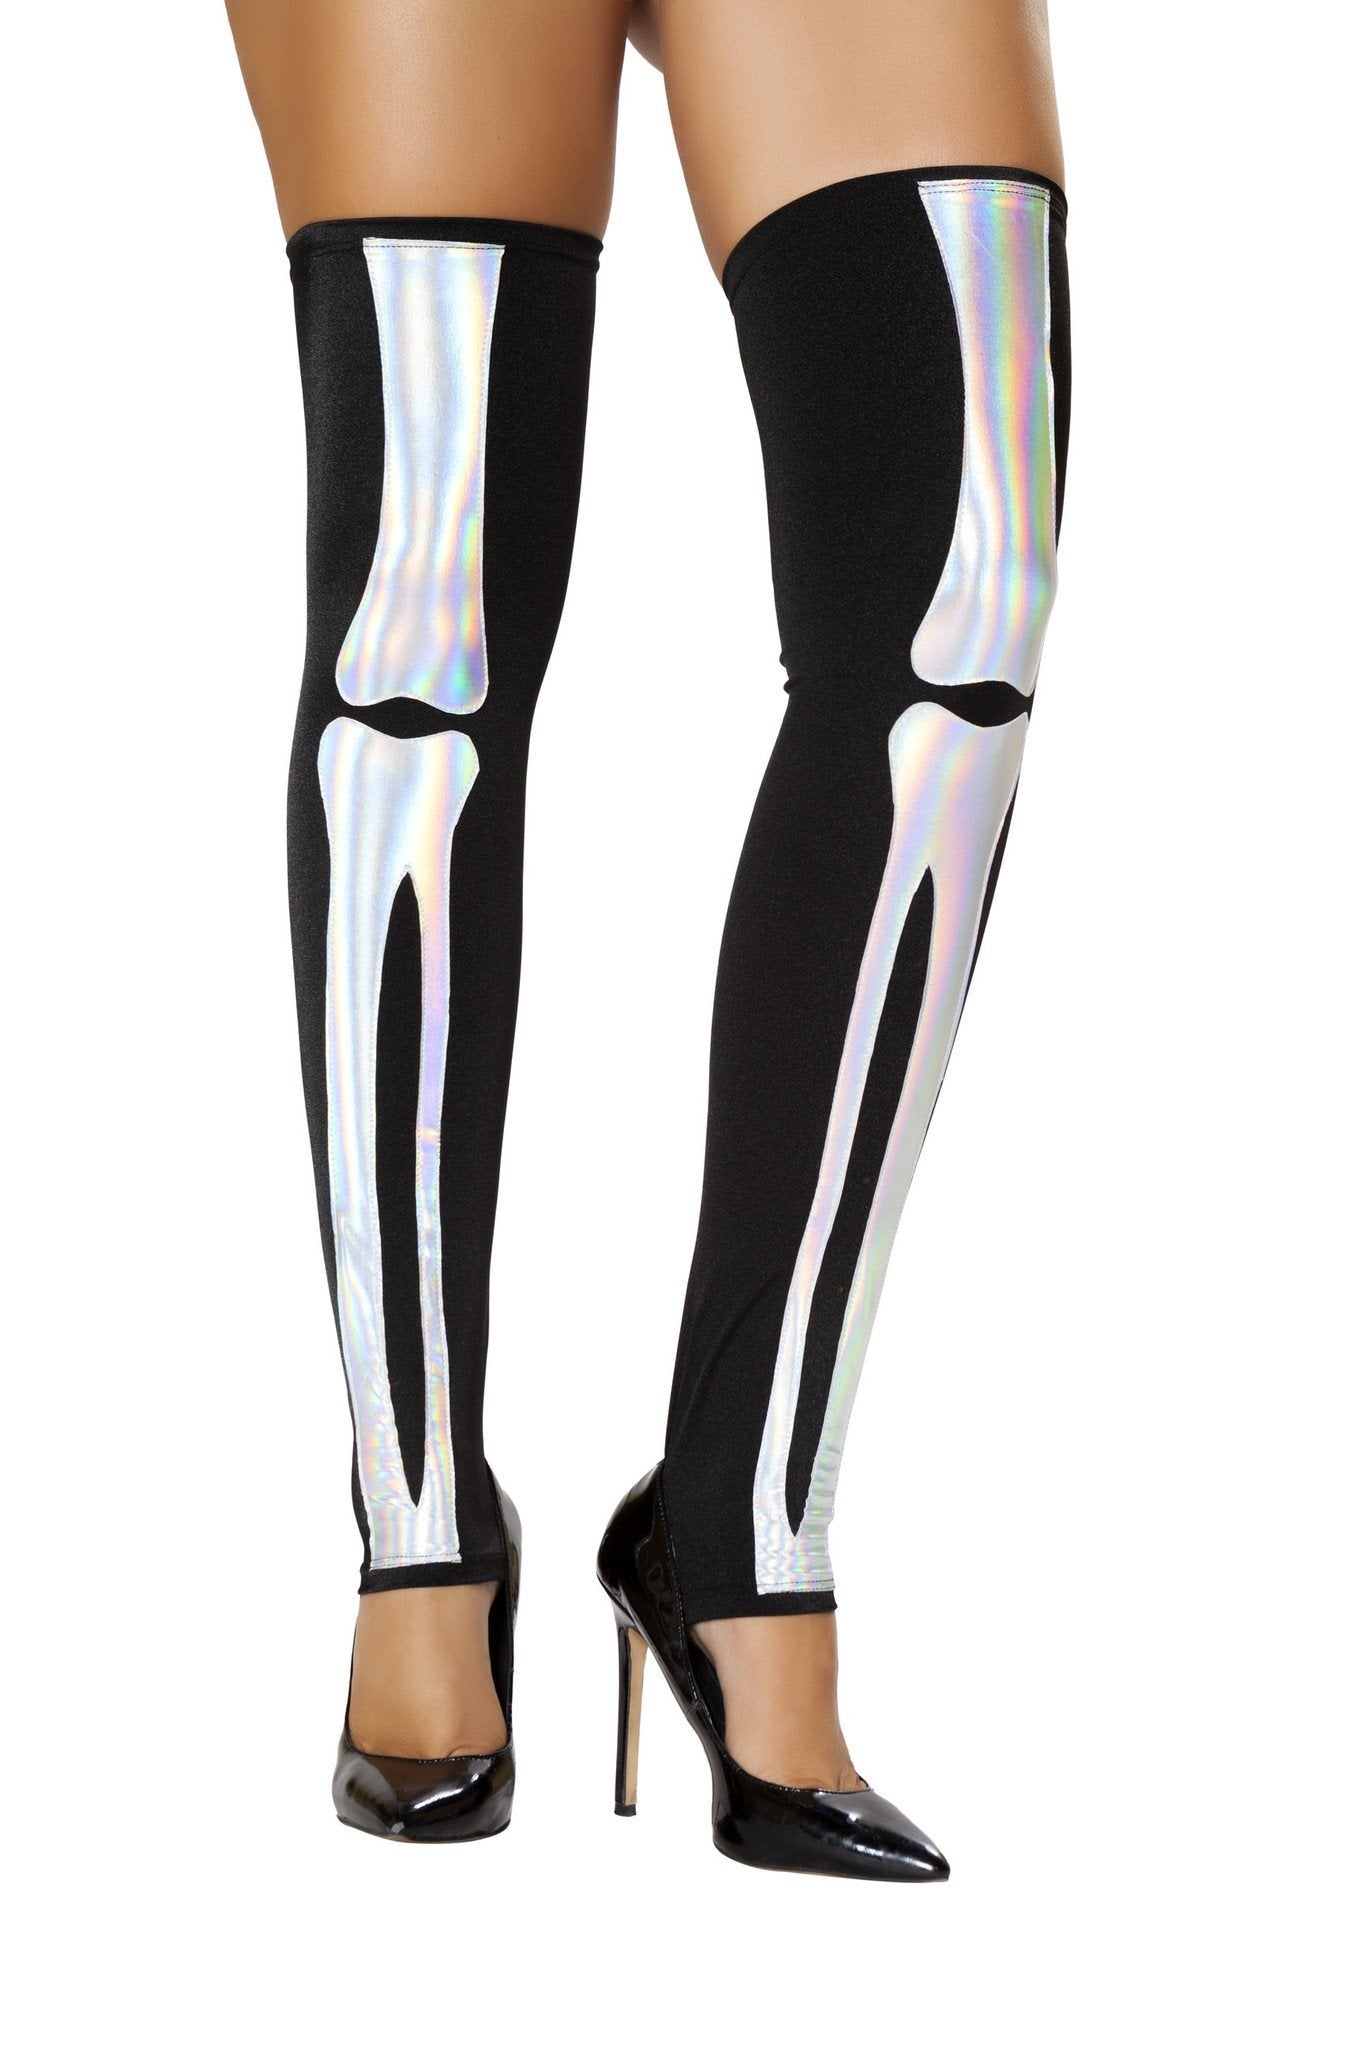 Buy Black Silver Skeleton Leggings from RomaRetailShop for 21.99 with Same Day Shipping Designed by Roma Costume ST4760-AS-O/S